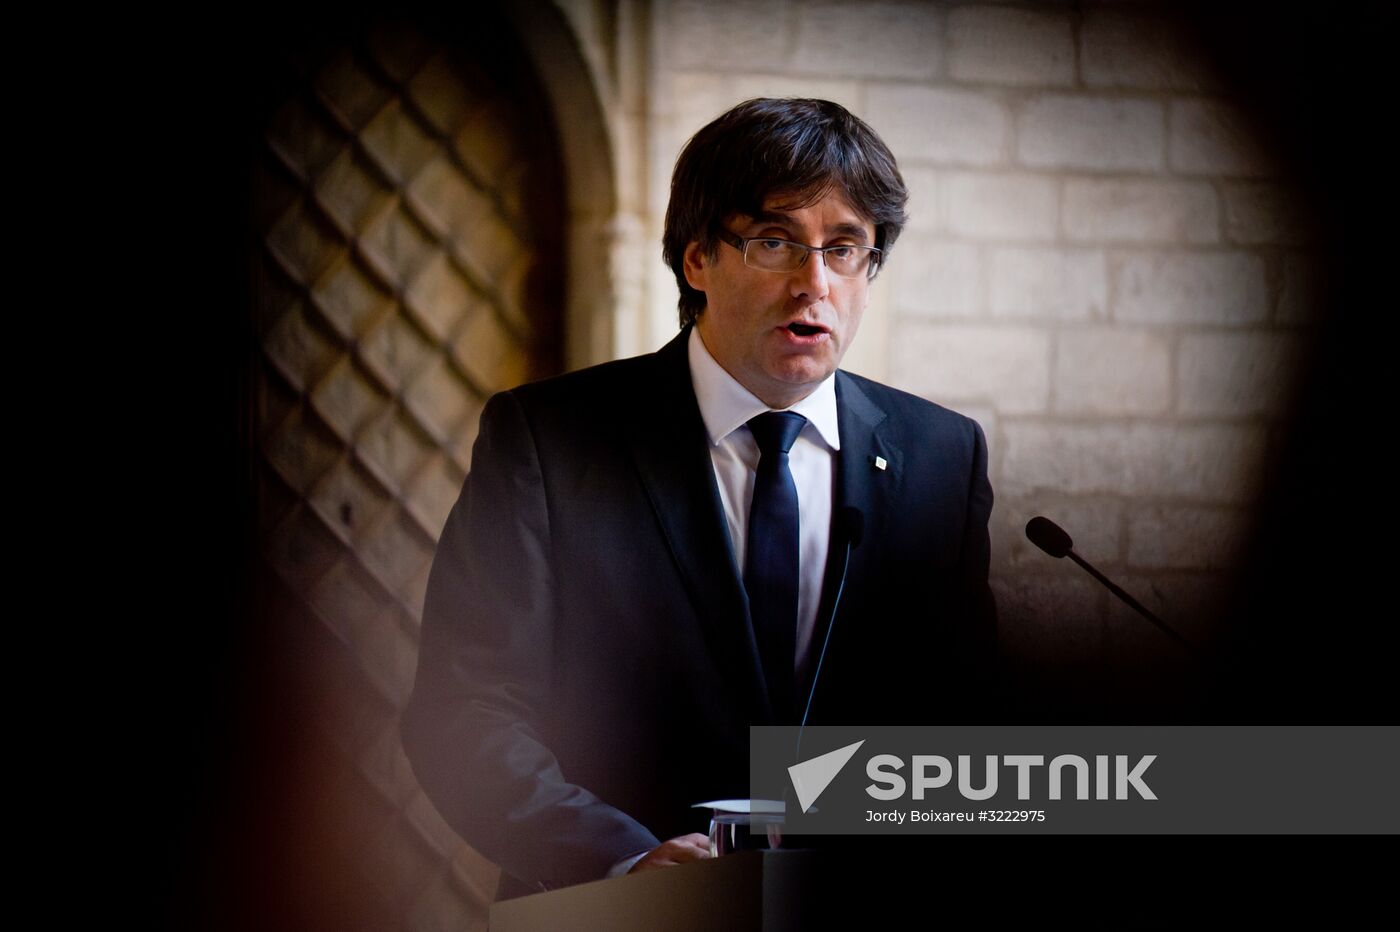 President of the Generalitat of Catalonia Carles Puigdemont makes official statement